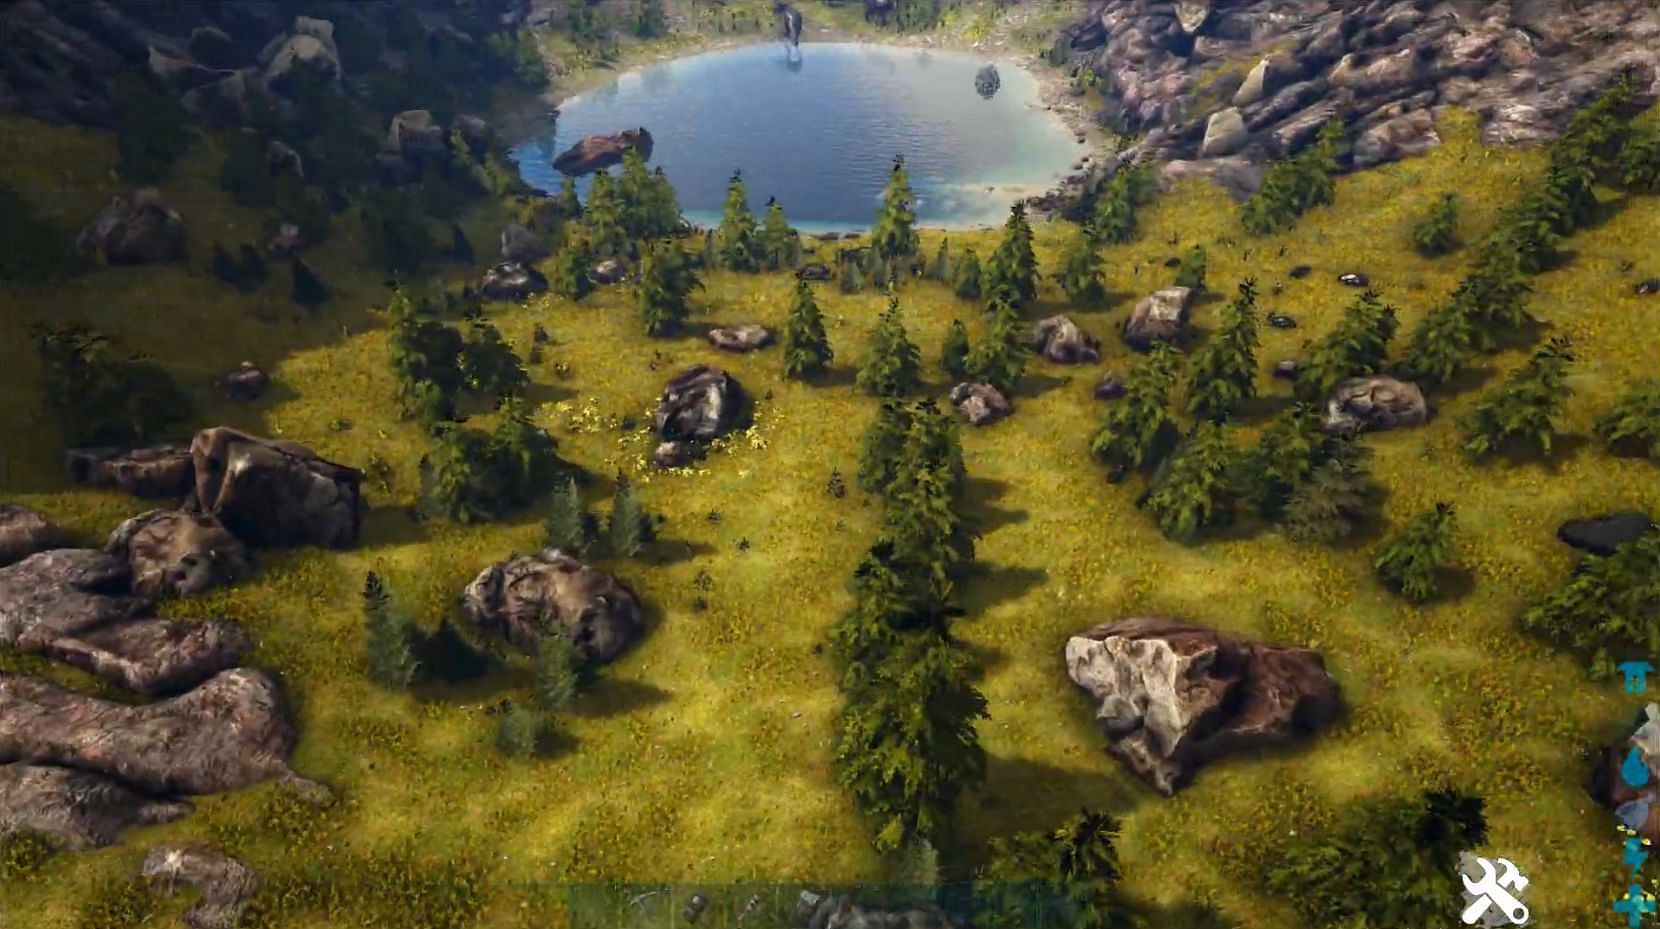 Obsidian spawning location A near the blue obelisk (Image via Ark: Survival Guide on YouTube)